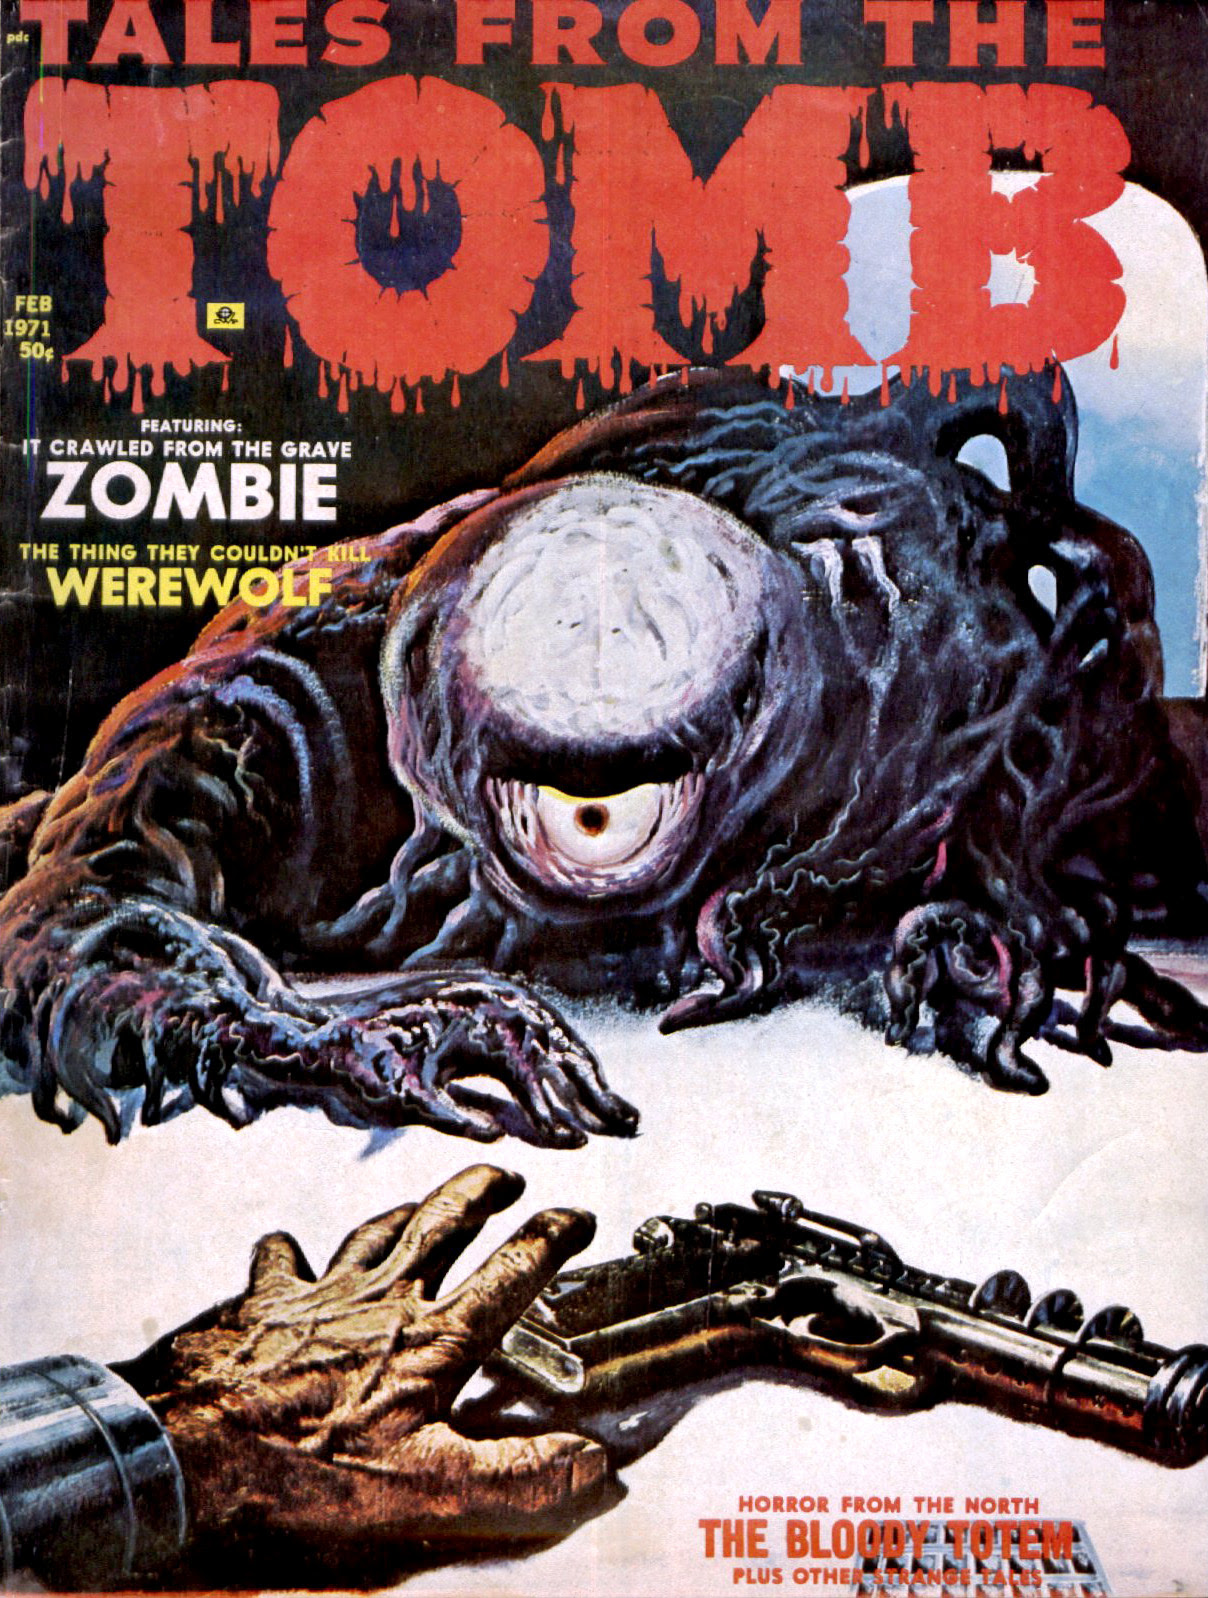 Tales from the Tomb - Vol. 3 #1 (Eerie Publications, 1971) 